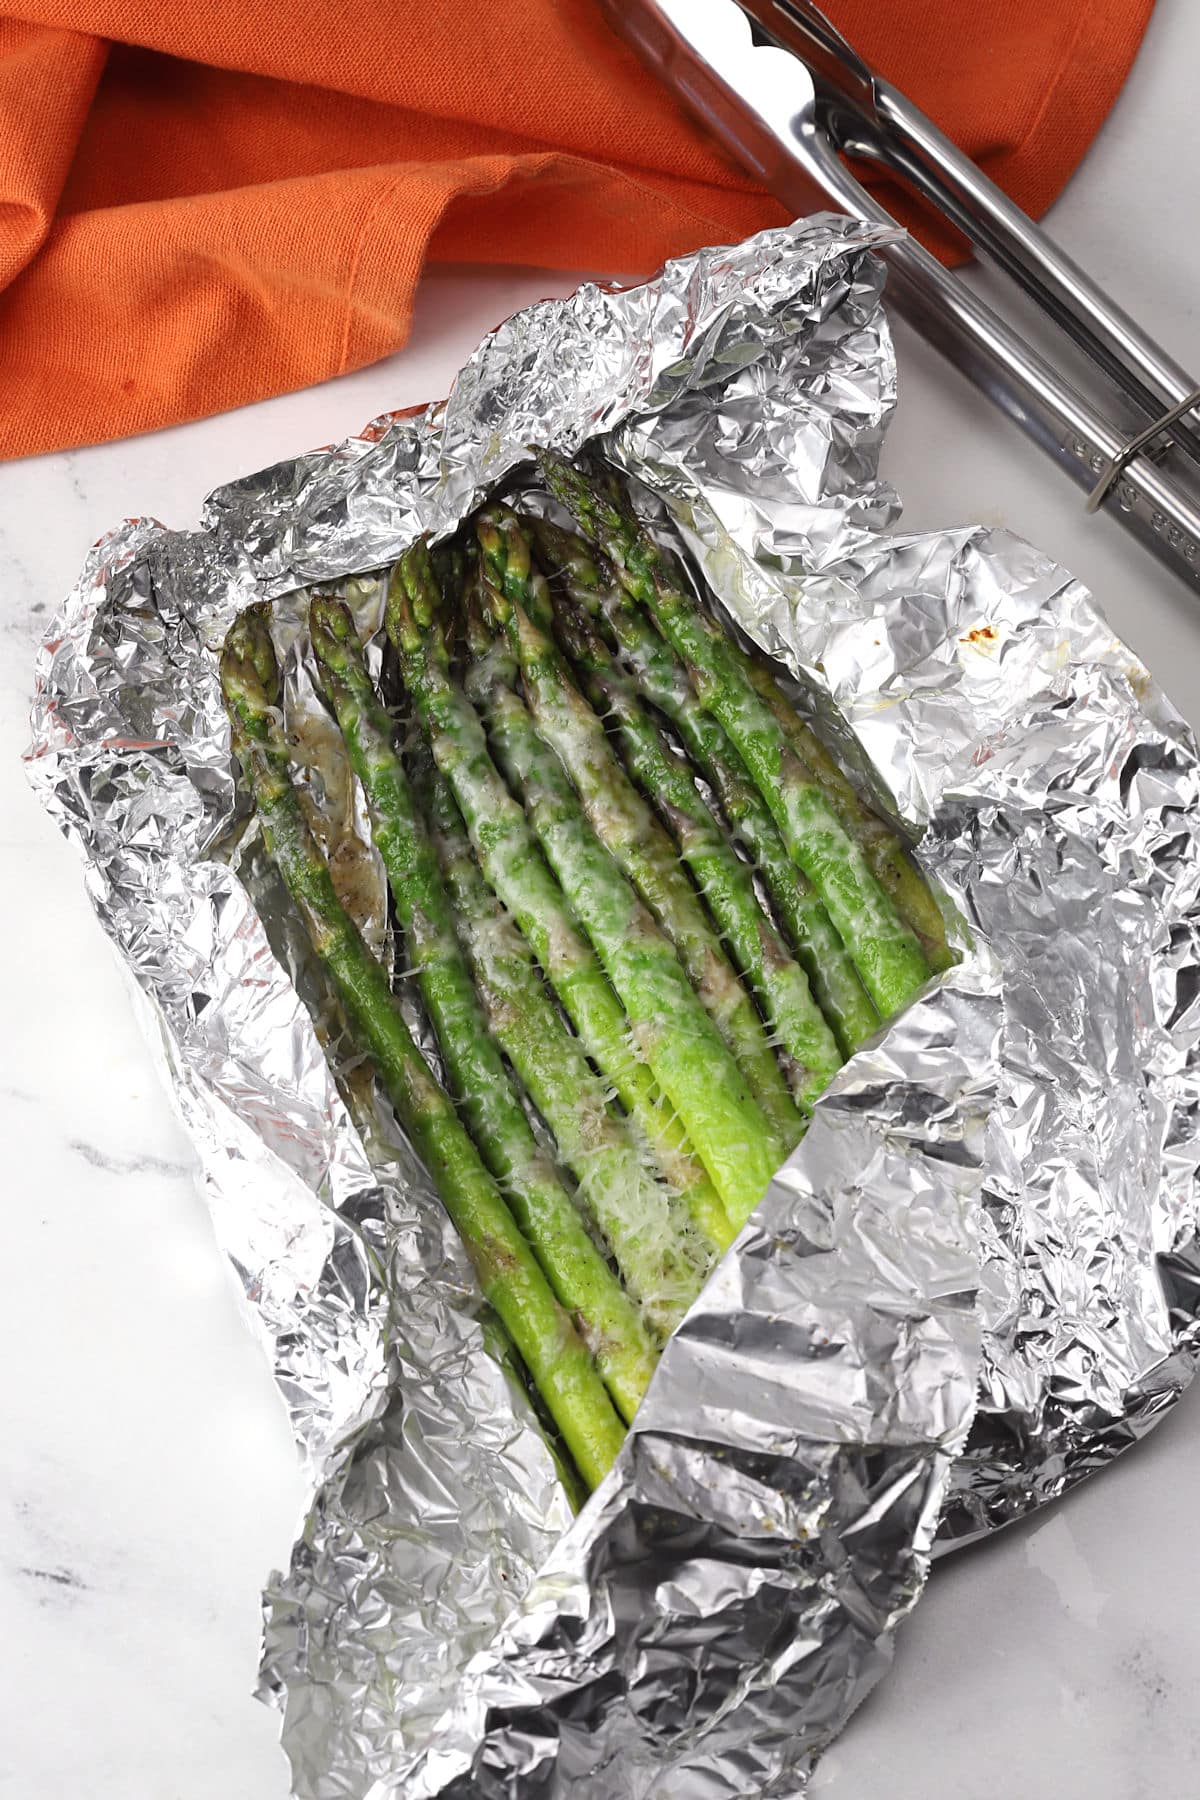 Packet of foil opened to reveal steamed asparagus topped with melted parmesan cheese.